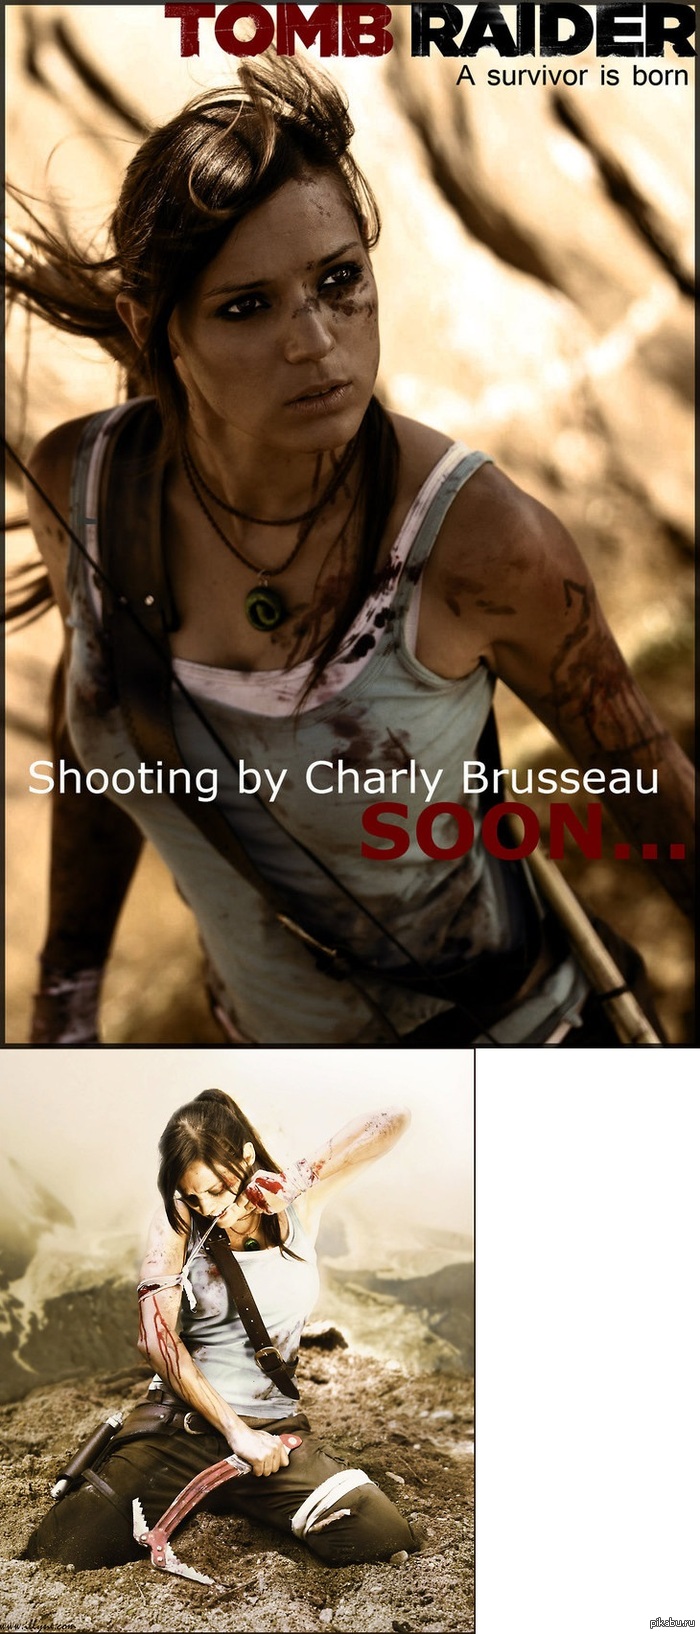  Tomb Raider.  :Charly Brusseau       p/s   